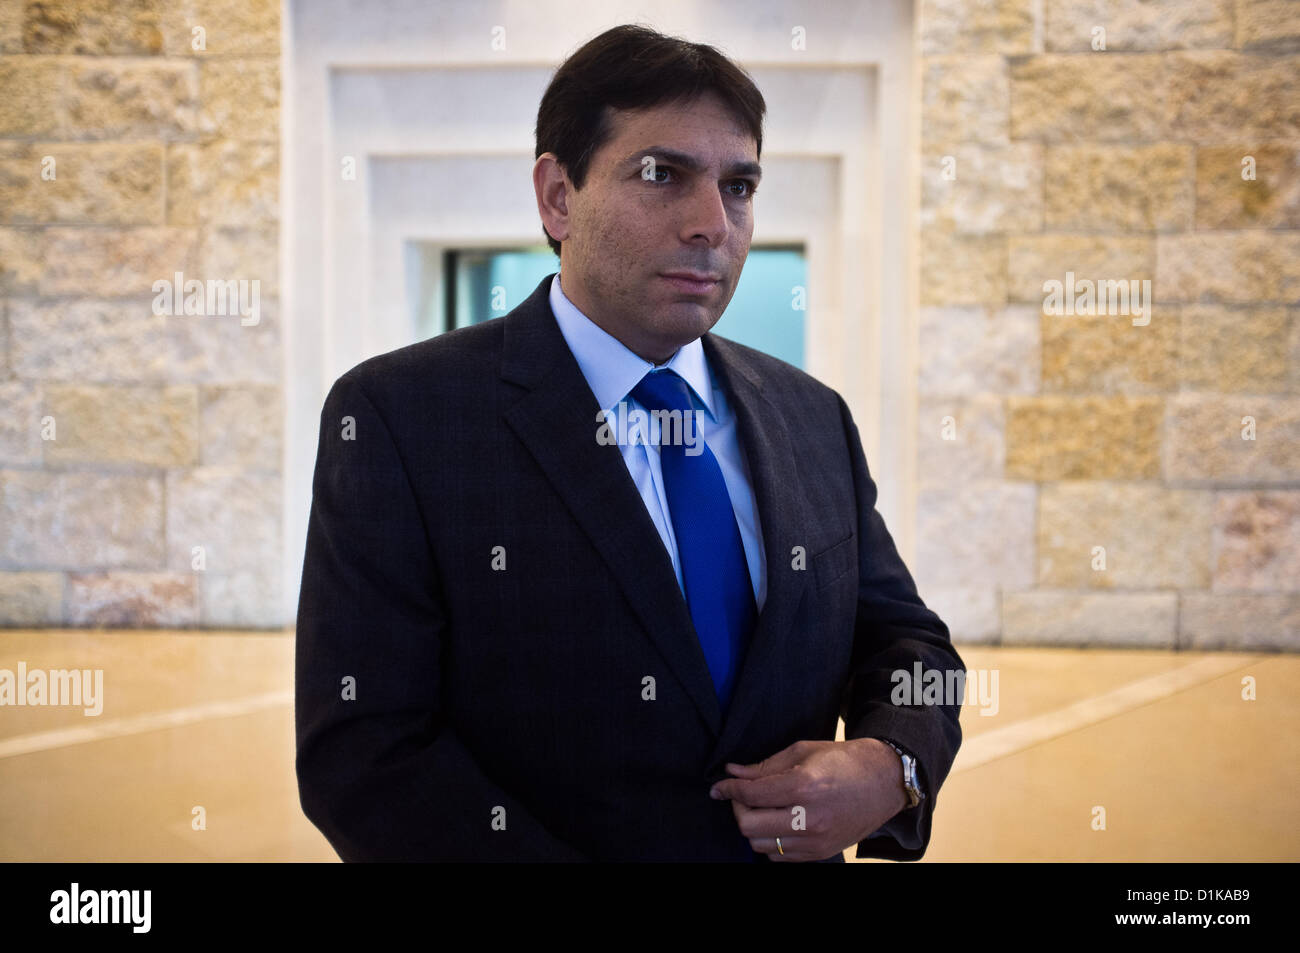 MK Danny Danon (Likud-Betenu Party), prior to hearing of Zuabi's appeal at High Court of Justice: 'Zuabi's place is not in the Knesset. Her place is in jail'. Jerusalem, Israel. 27-Dec-2012.  Arab MK Ms. Hanin Zuabi (Balad party) appeals election disqualification by Knesset Central Elections Committee before High Court of Justice before an extended panel of nine judges headed by Supreme Court President Asher Grunis. Stock Photo